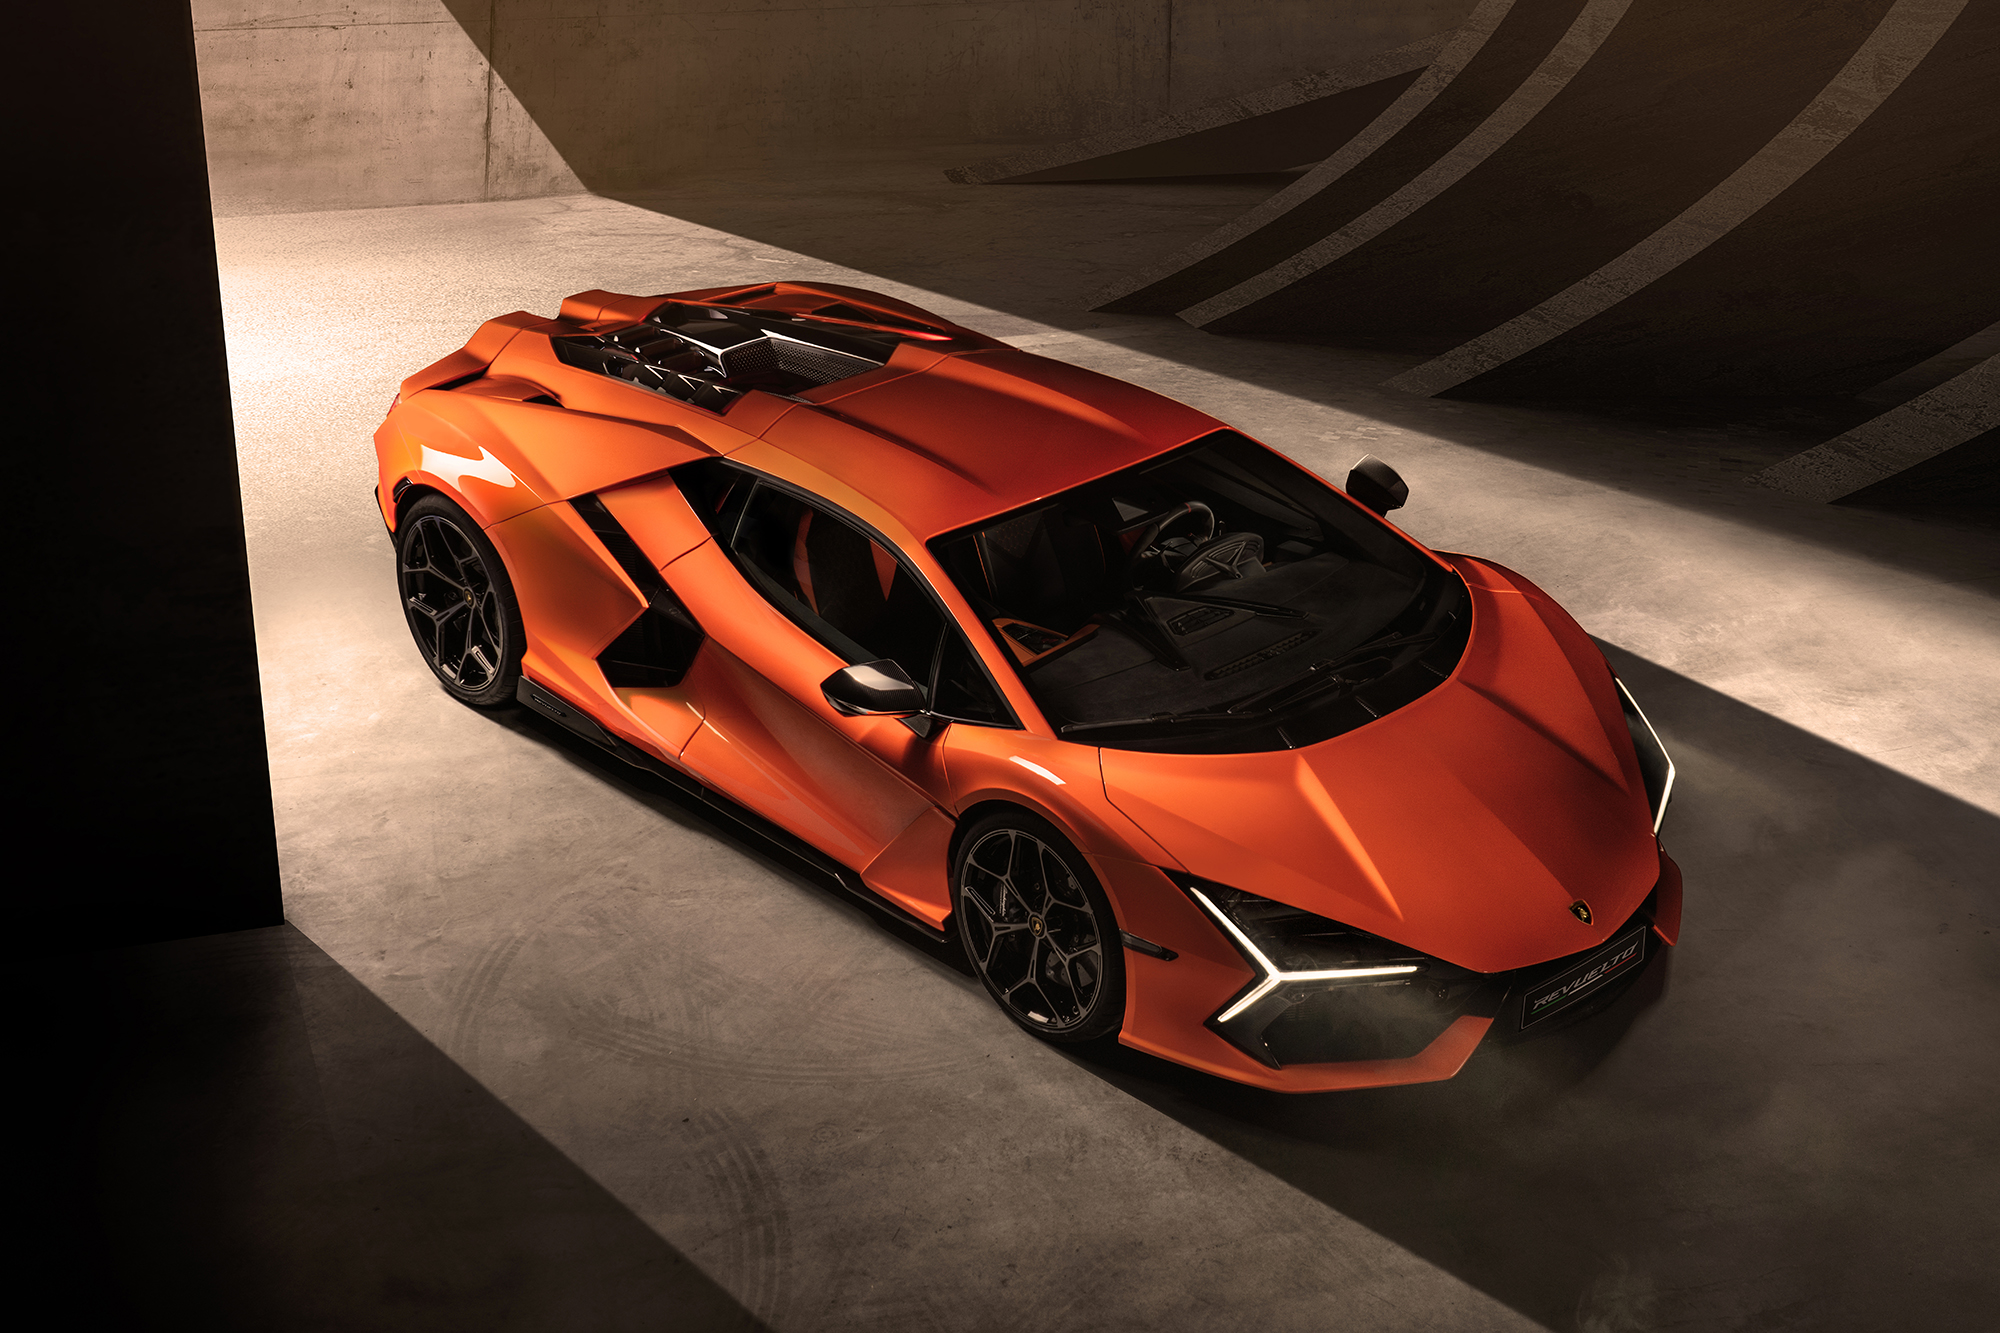 Luxury Italian sports car designer Lamborghini has unveiled its first supercar with a charging port...